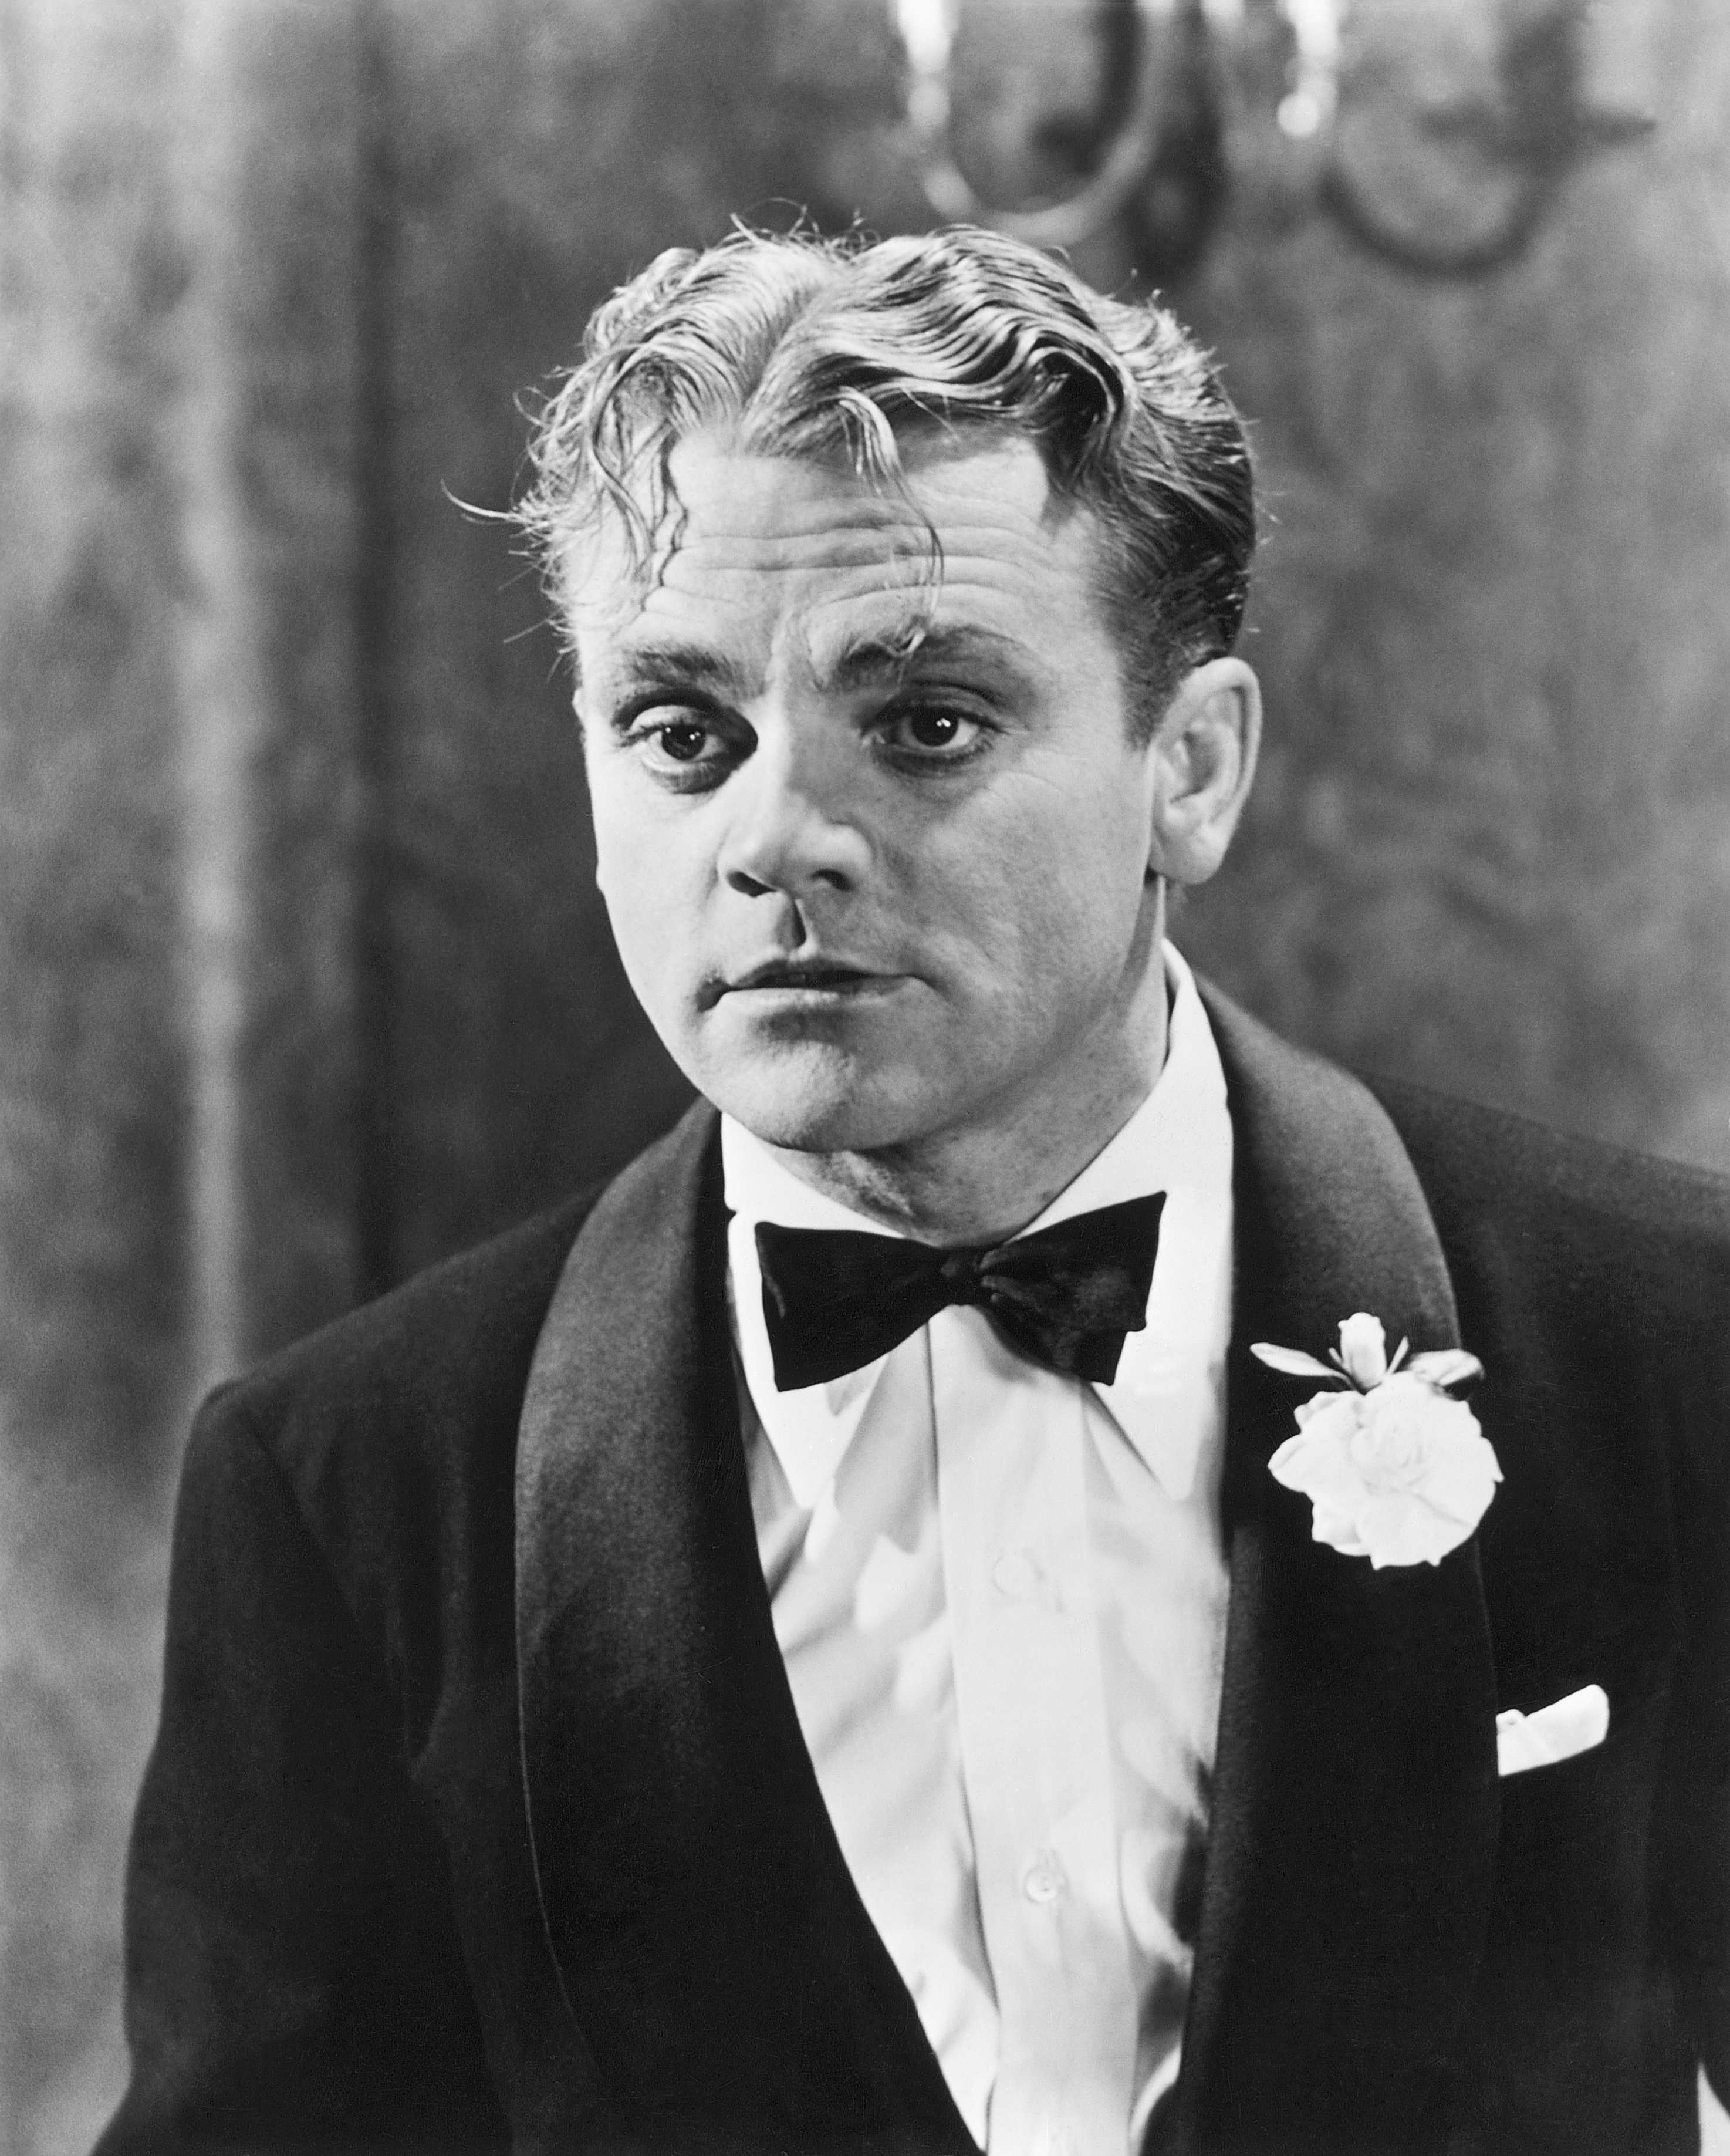 James Cagney as William "Rocky" Sullivan in "Angels With Dirty Faces" | Photo: Getty Images